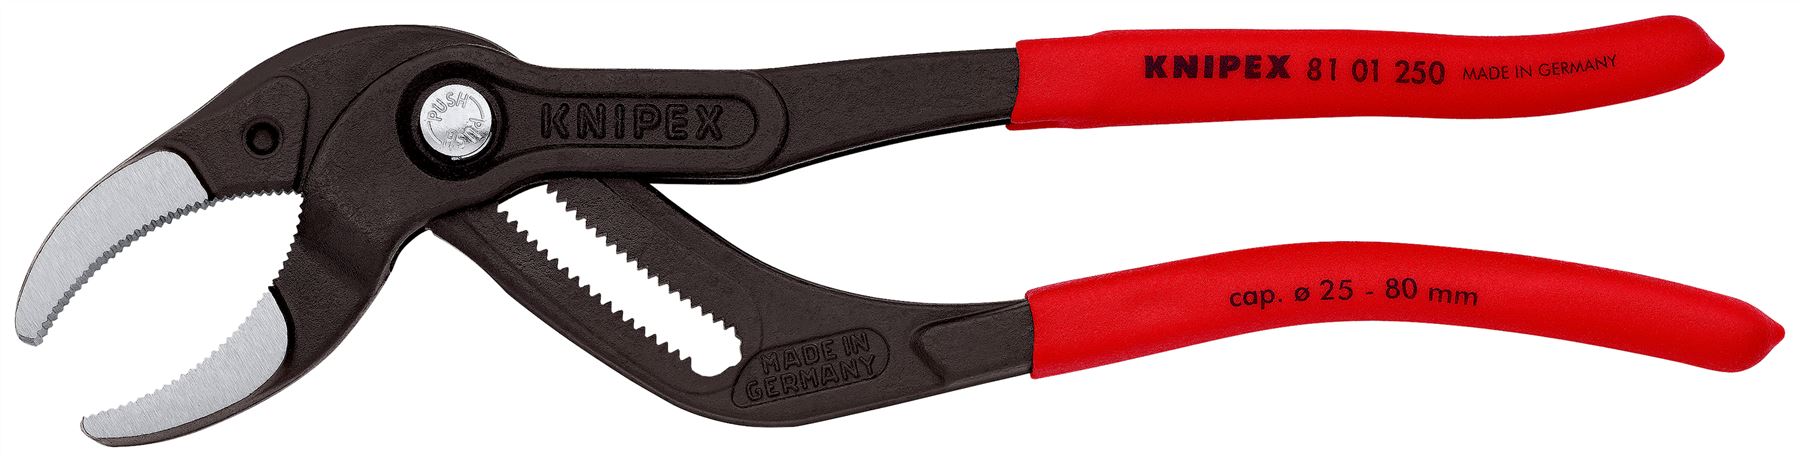 KNIPEX Siphon and Connector Pliers for Traps Tube Fittings Connectors 250mm Plastic Coated 81 01 250 SB